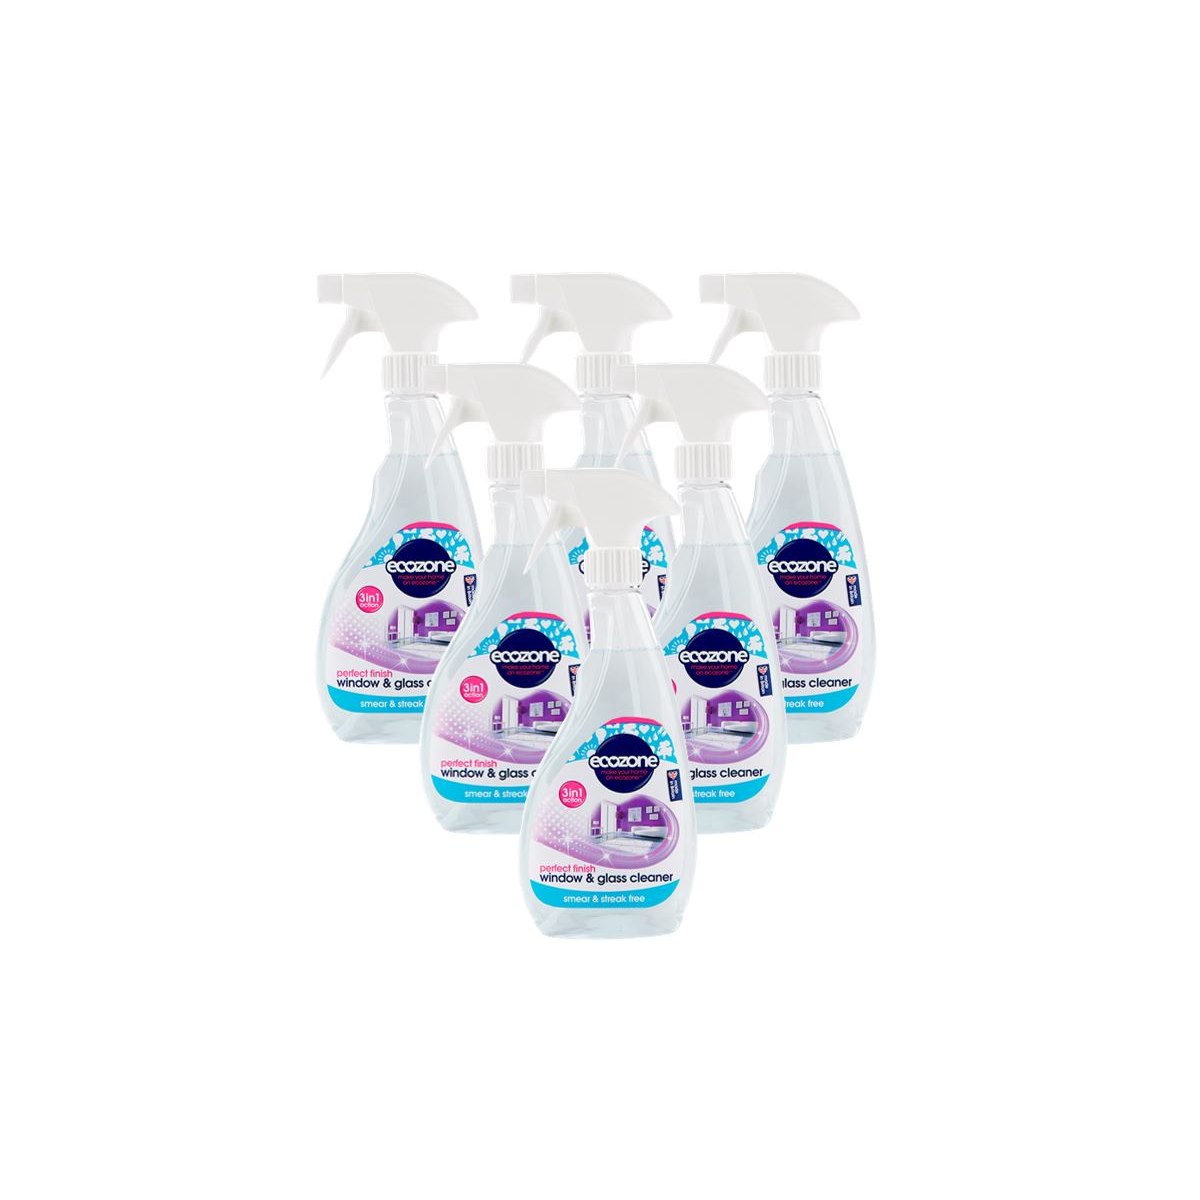 Case of 6 x Ecozone Window and Glass Cleaner 500ml